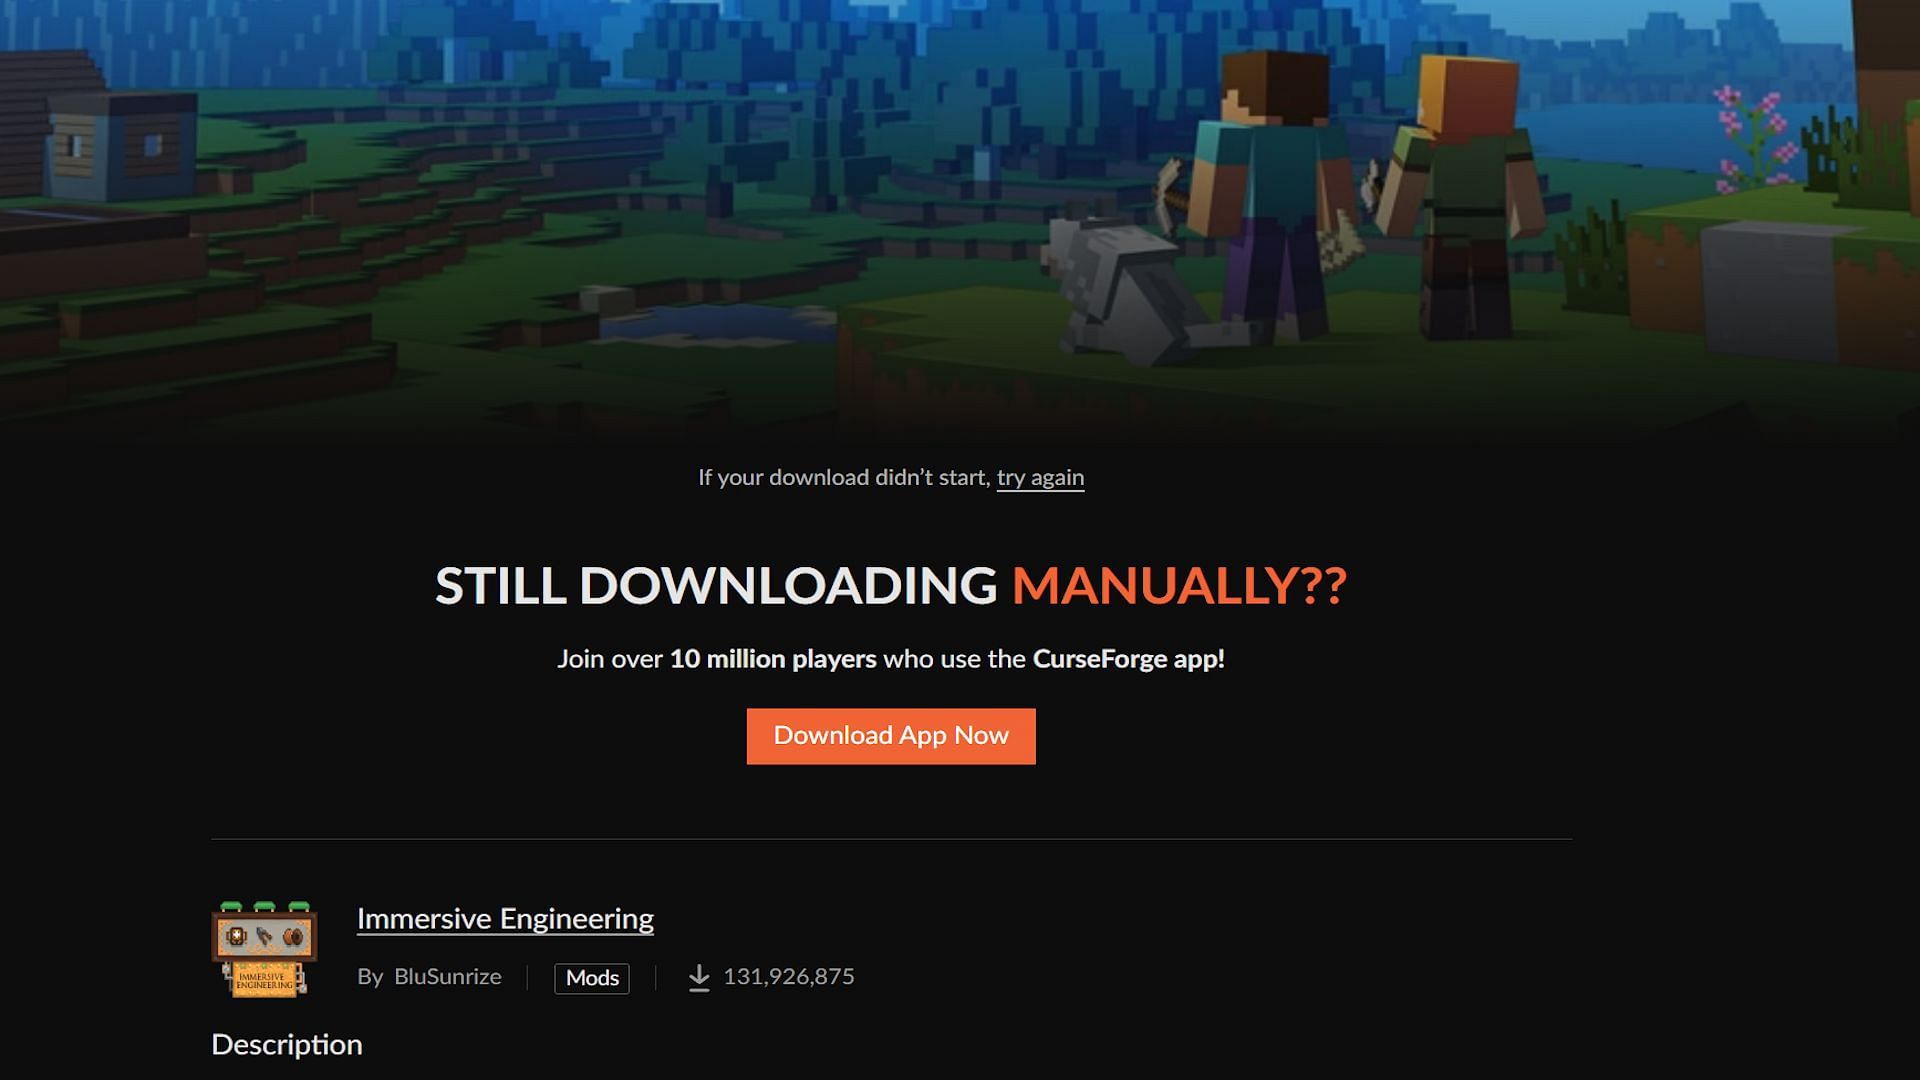 The download screen for Immersive Engineering (Image via CurseForge)